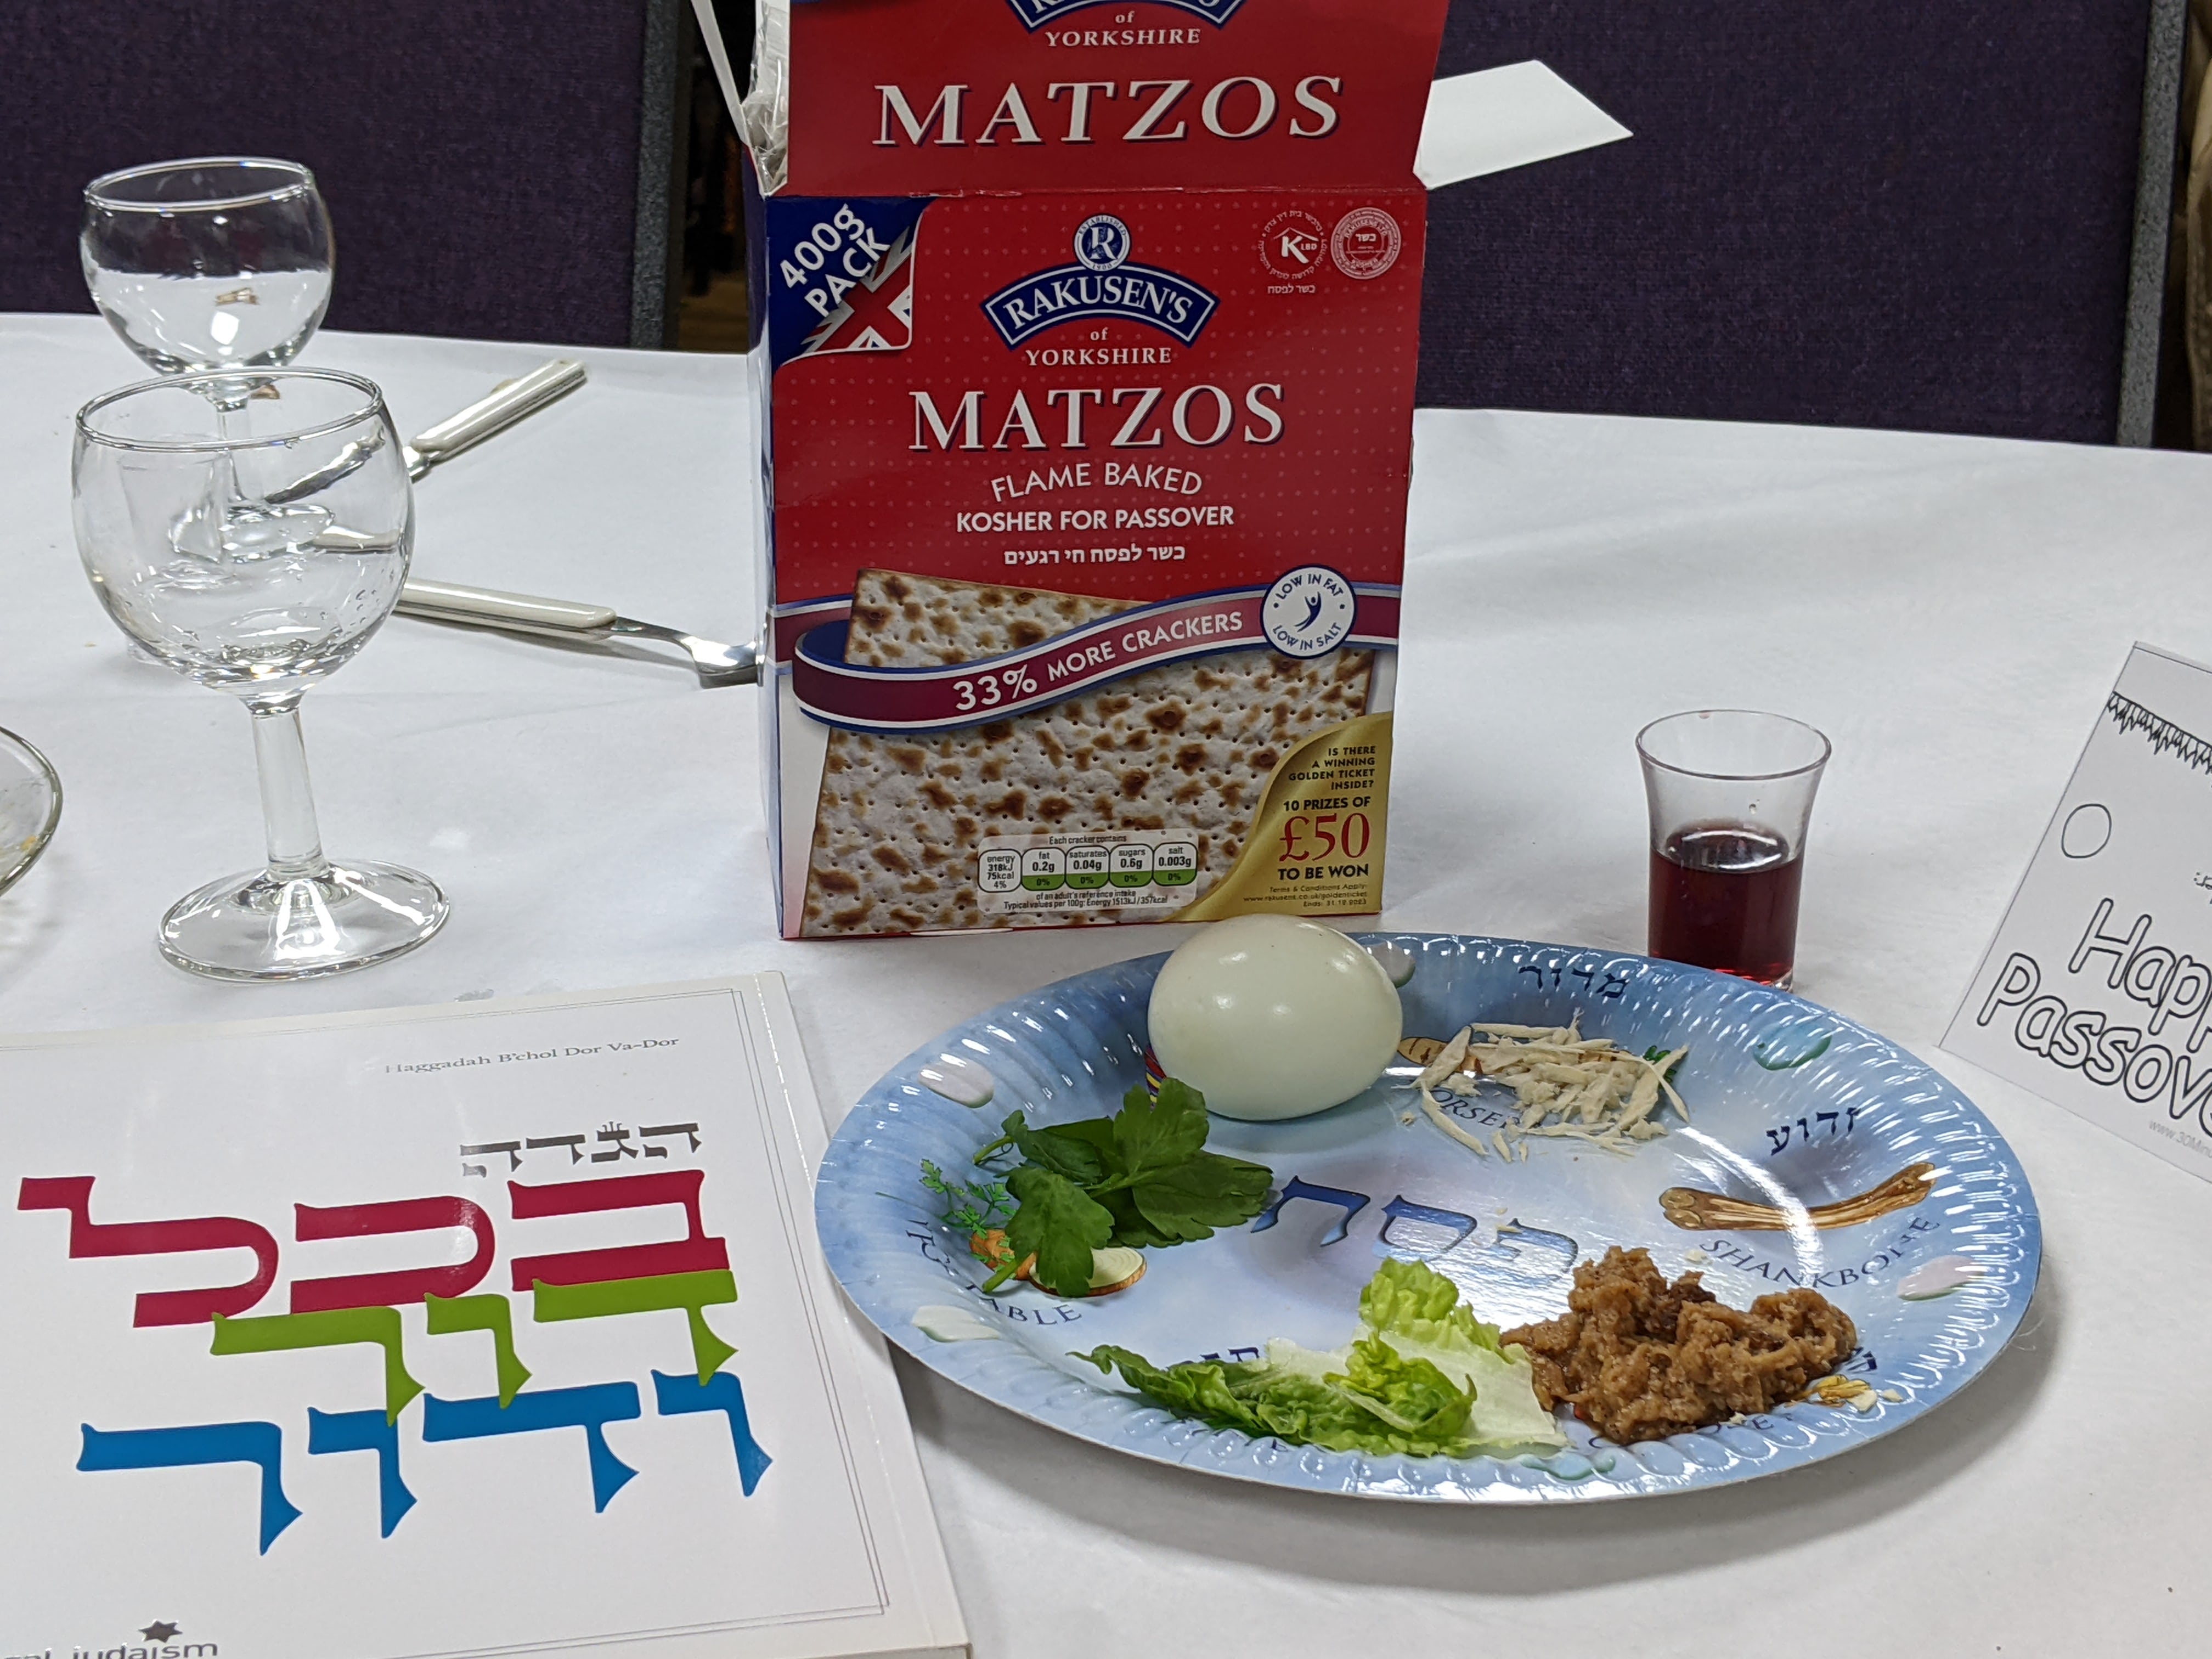  ... And individual seder plates too, so that everyone could join in with all the symbolic foods 